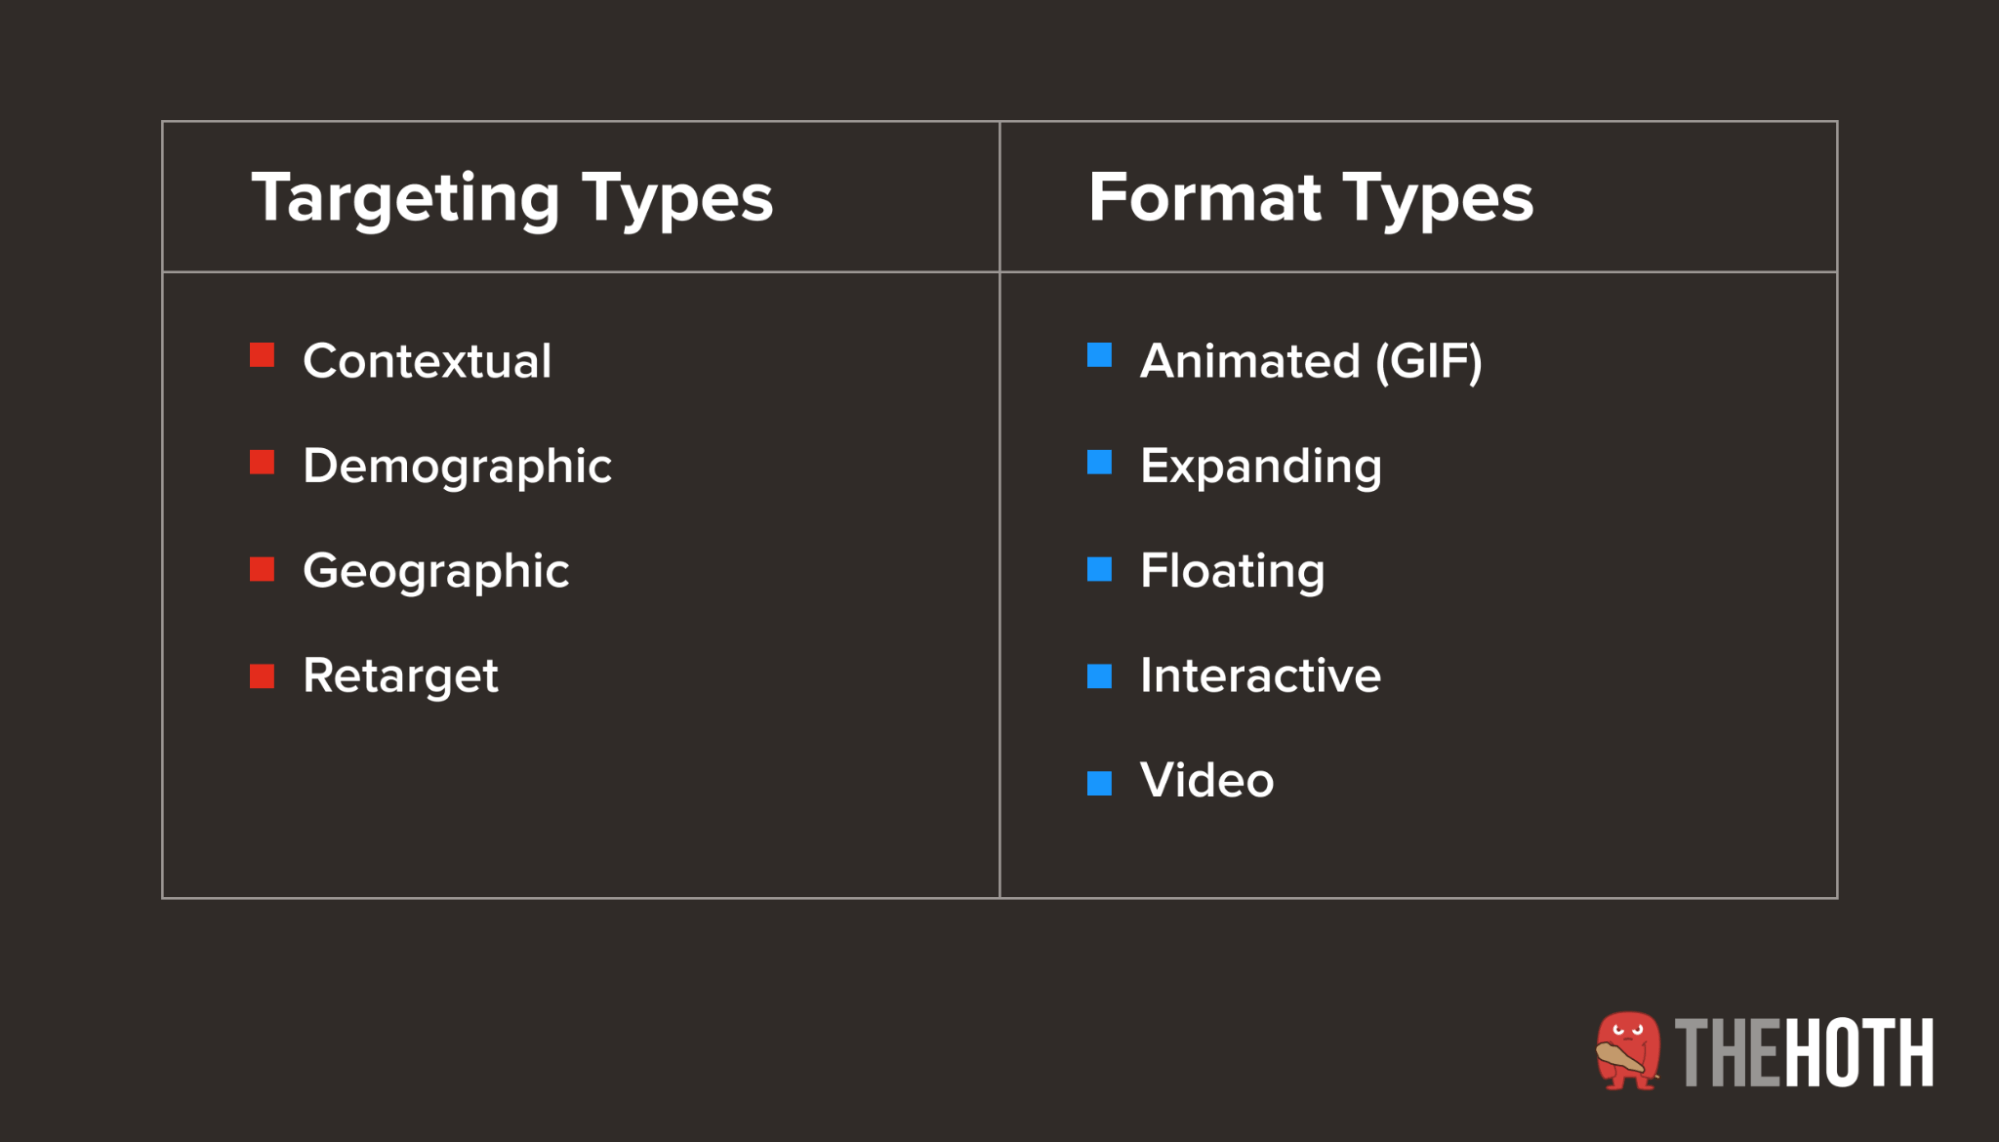 Display ad types by targeting and format